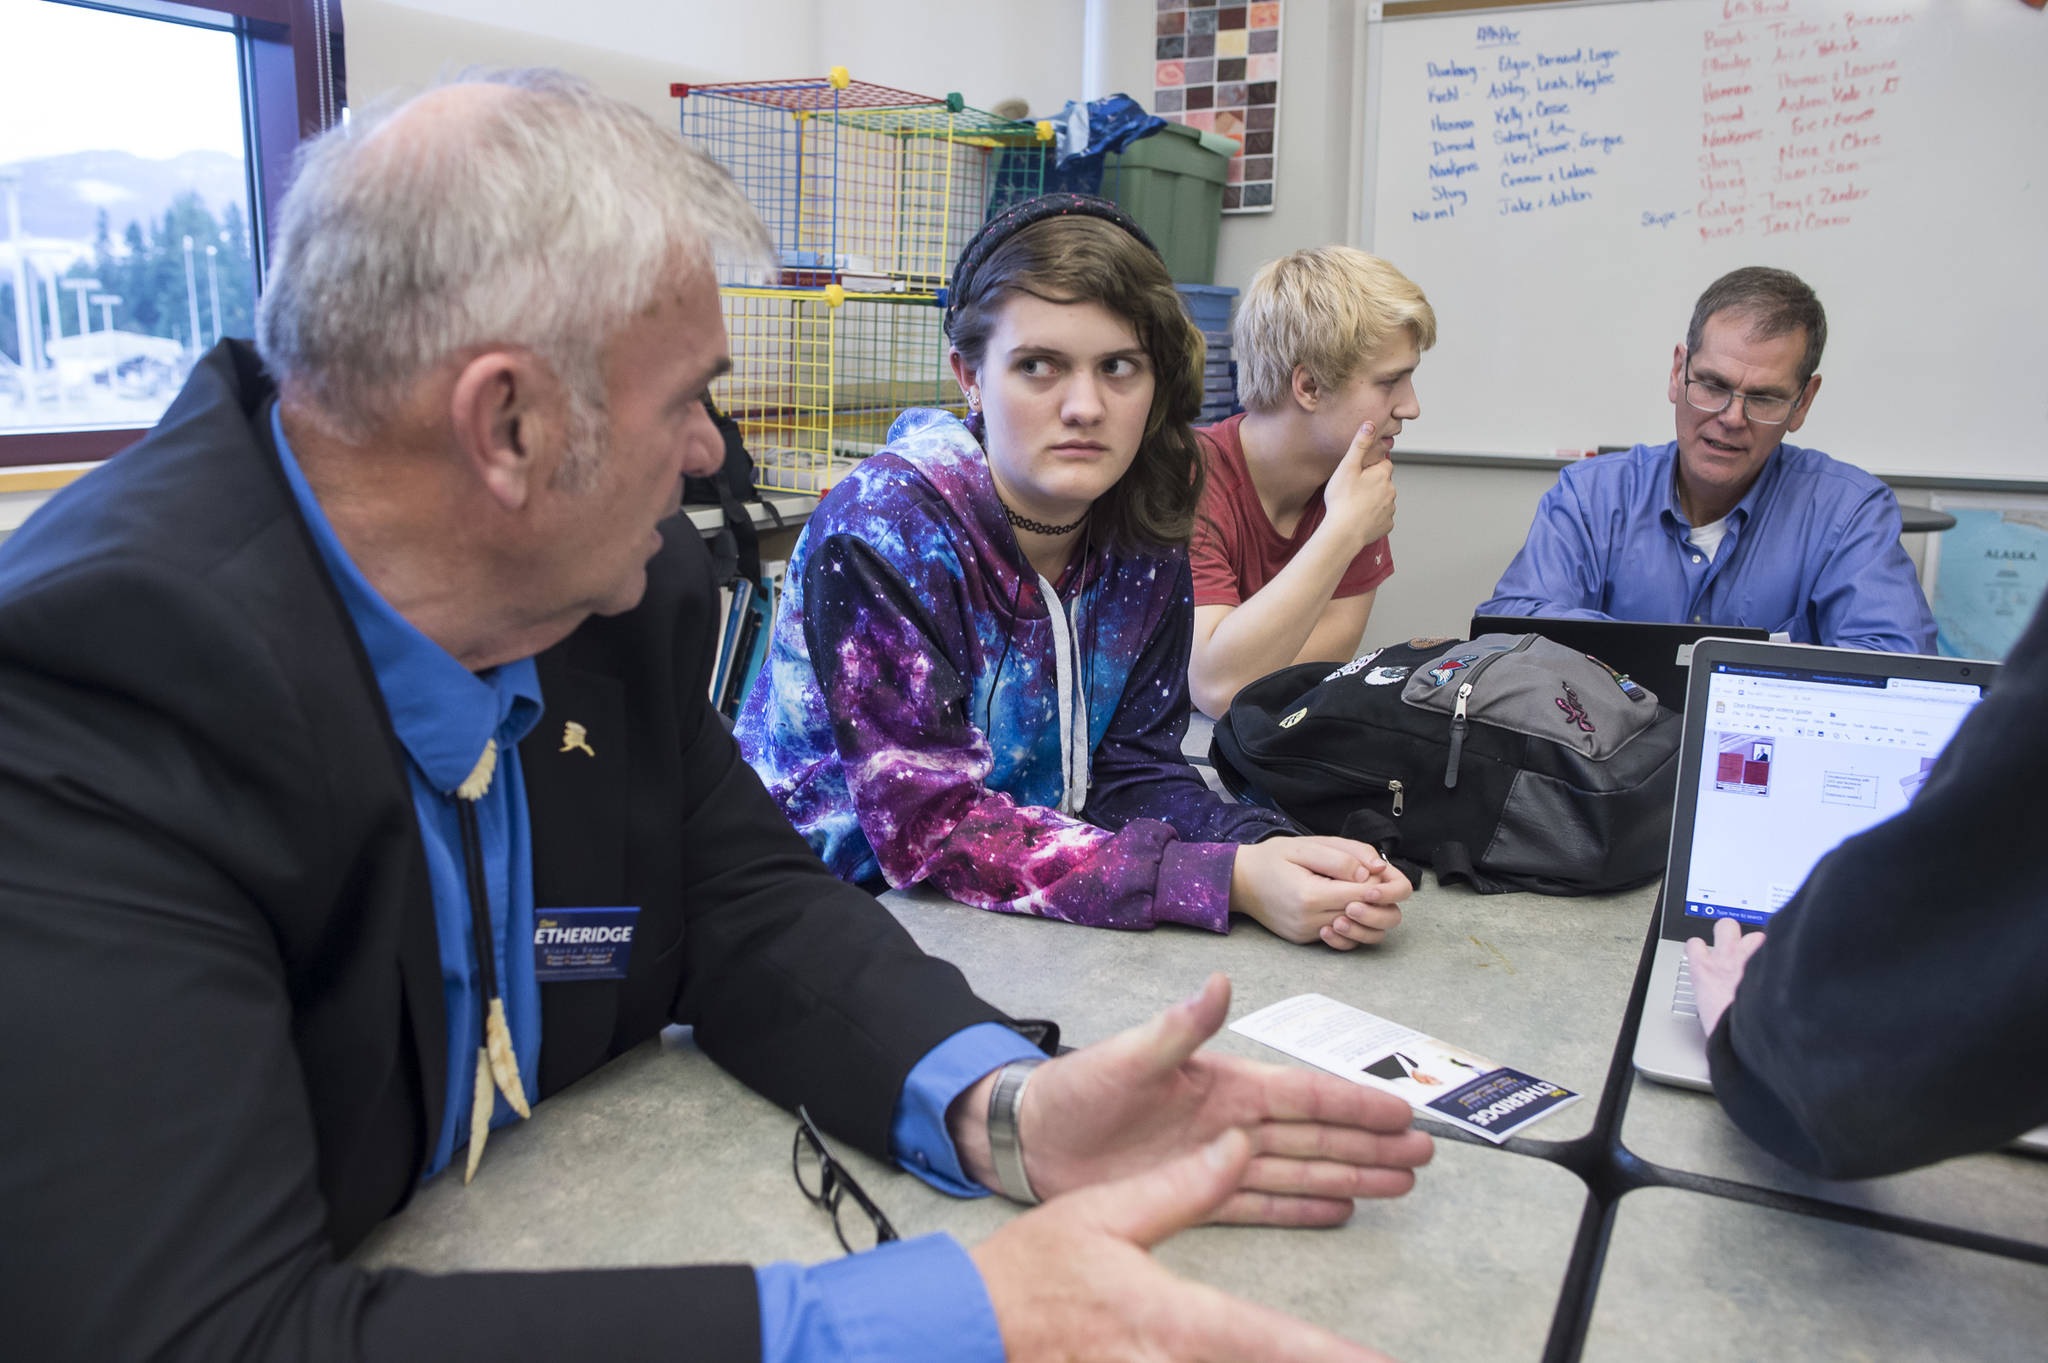 Senate District Q candidate Don Etheridge, left, and House District 34 candidate Jerry Nankervis, right, talk with Thunder Mountain High School senior students Arianna Csech, center, and Eric Sidney during their government class on Friday, Oct. 26, 2018. (Michael Penn | Juneau Empire)